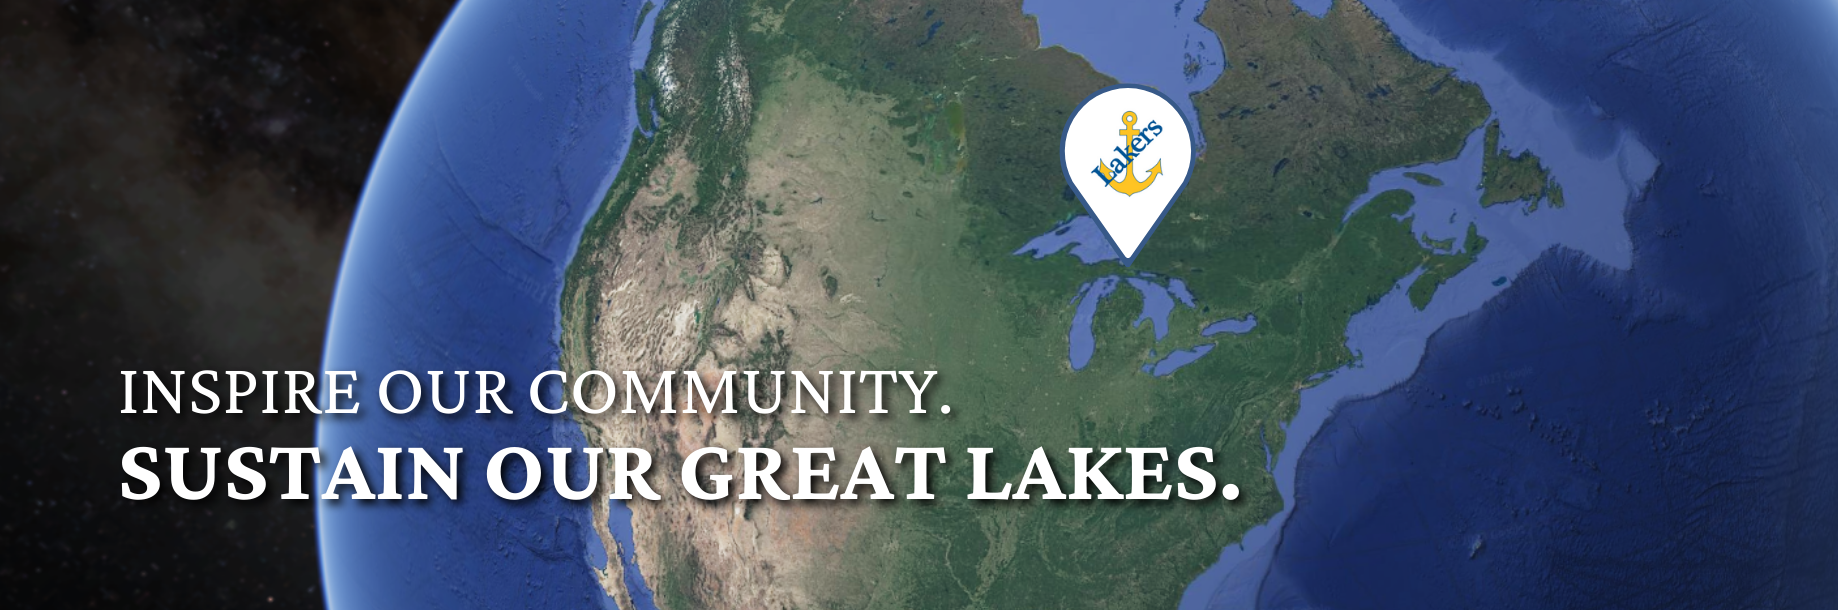 Inspire Our Community. Sustain Our Great Lakes. Website Header.